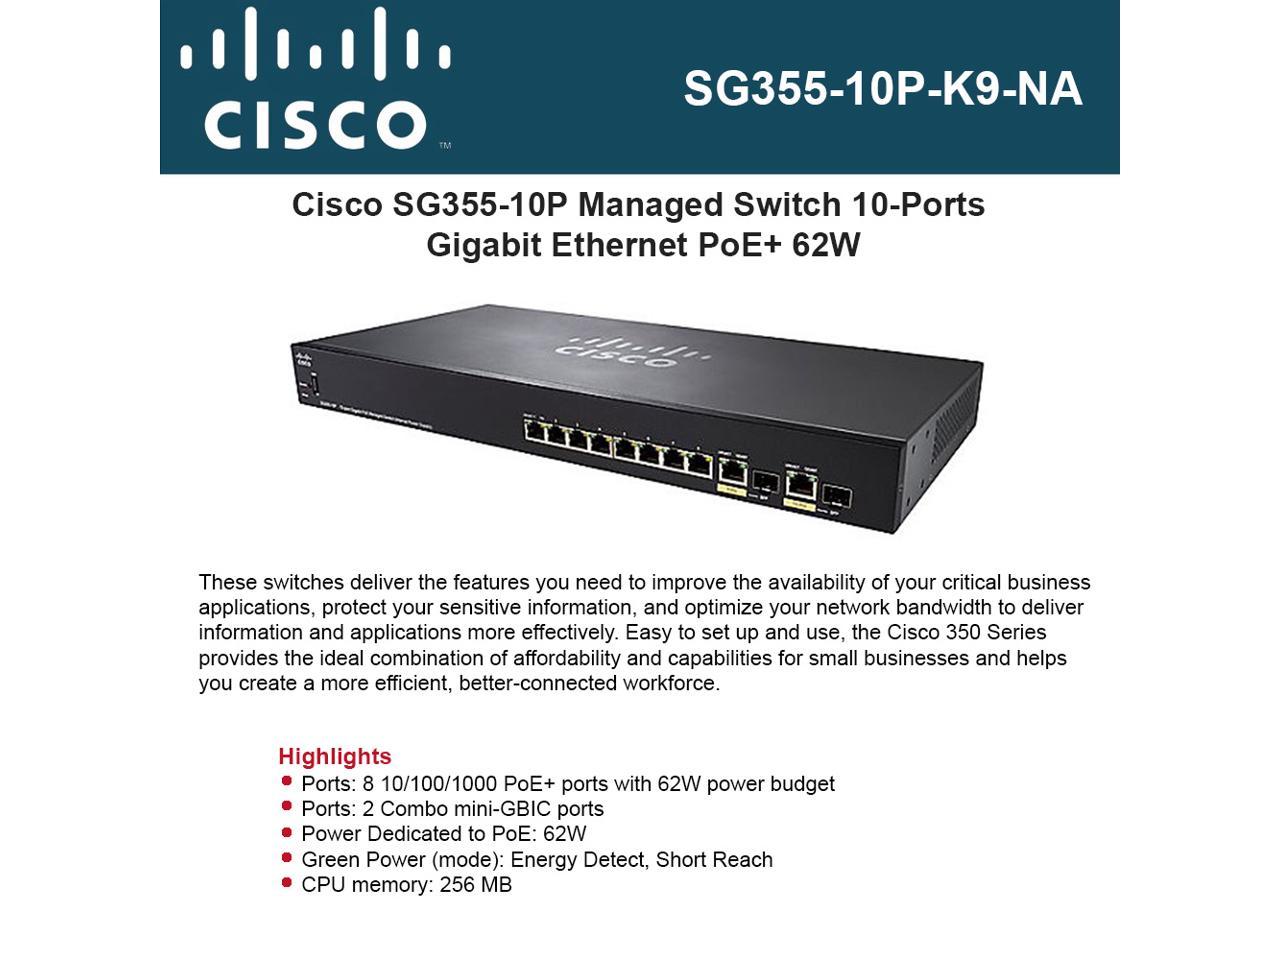 Sg355-10p 10-port Gb Poe Mgswt - SG355-10P-K9-NA